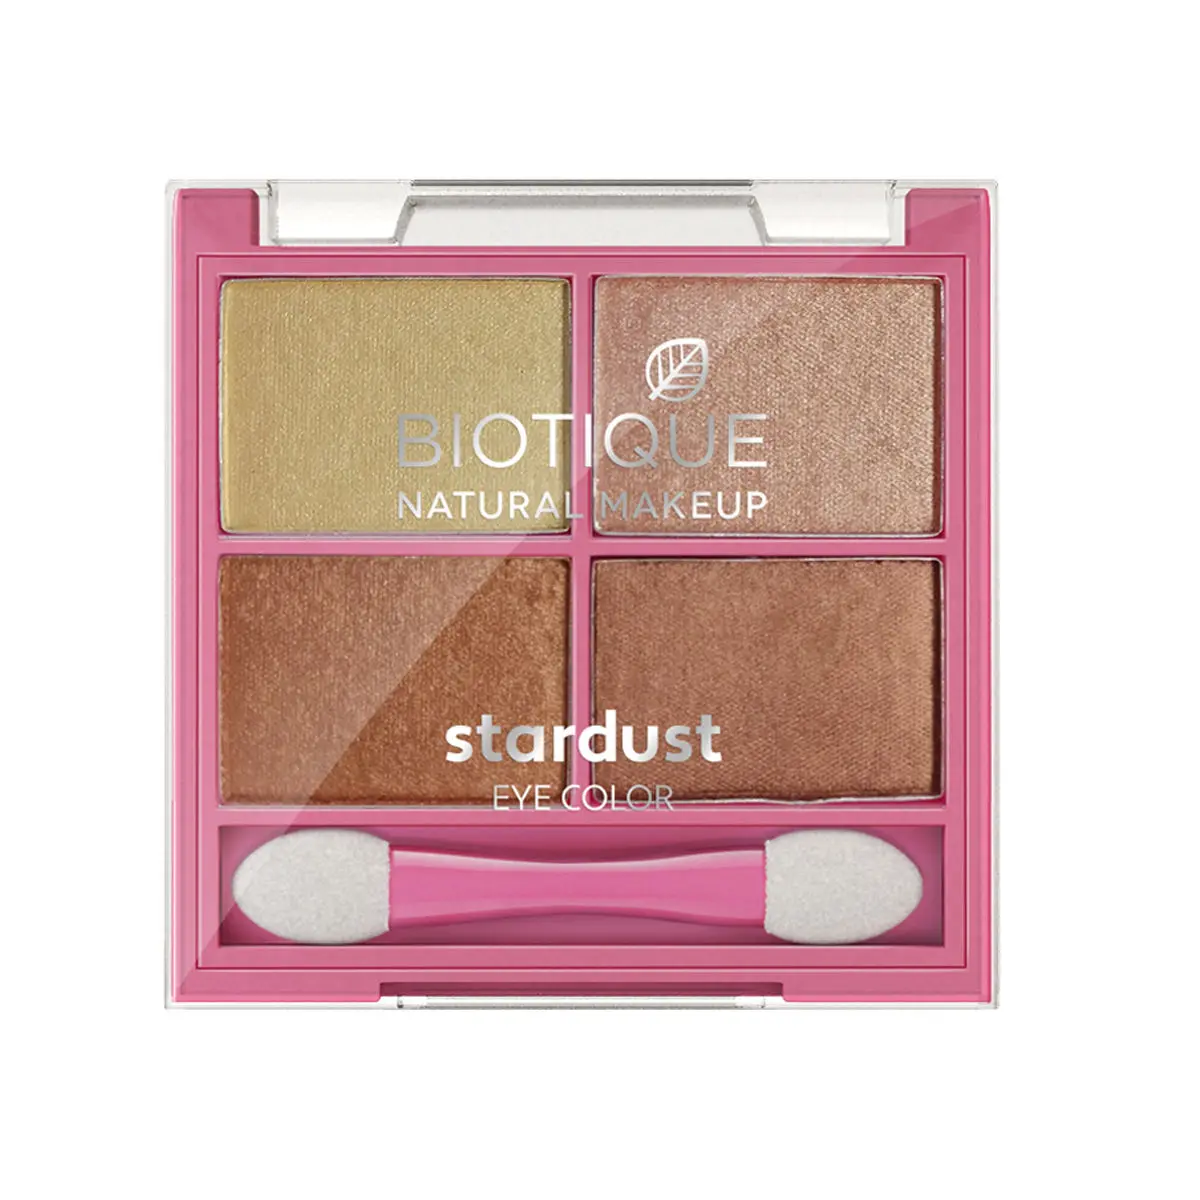 Biotique Natural Makeup Stardust Eye Shadow (Earth Song)(7 g)